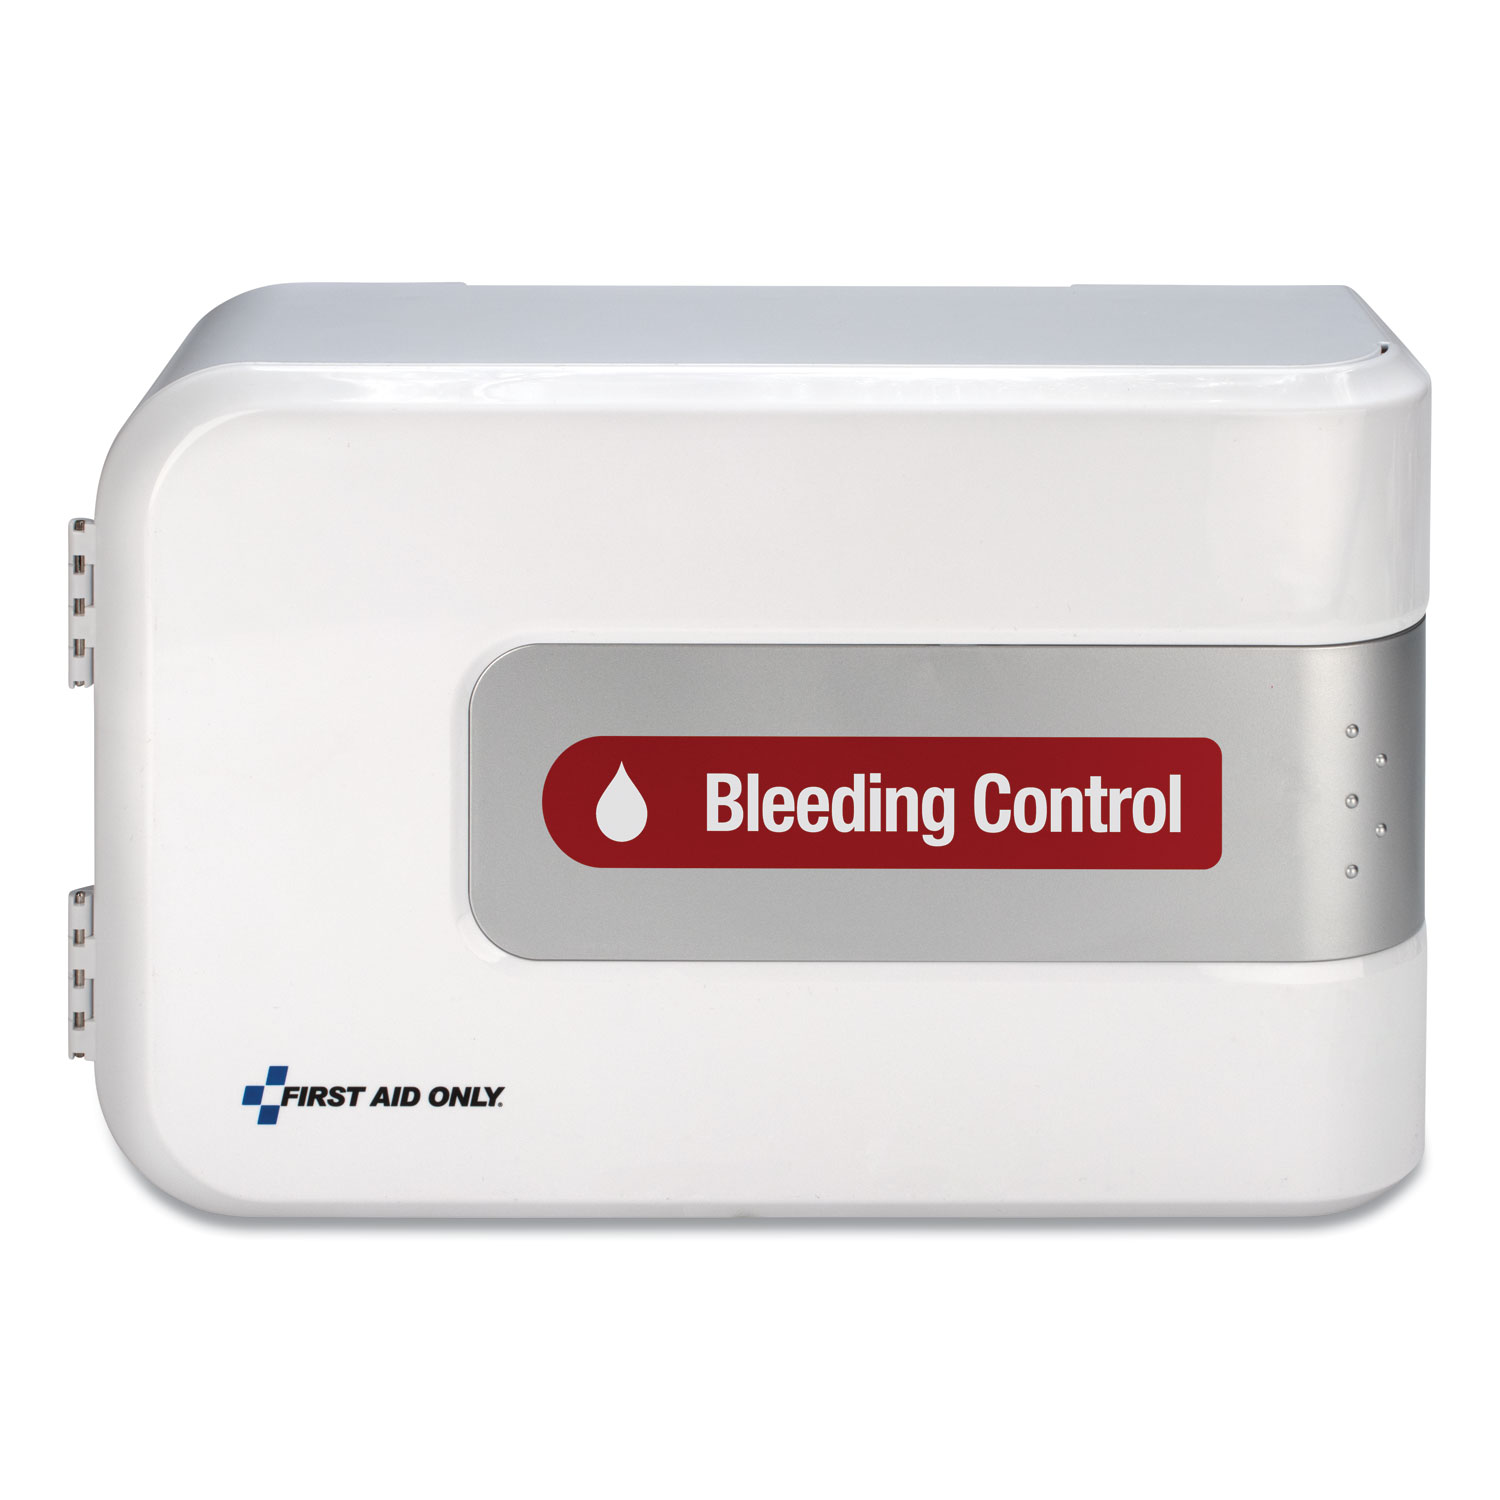 First Aid Only™ Bleeding Control Cabinet - Texas Mandate, 10.75 x 16.13 x 5.75